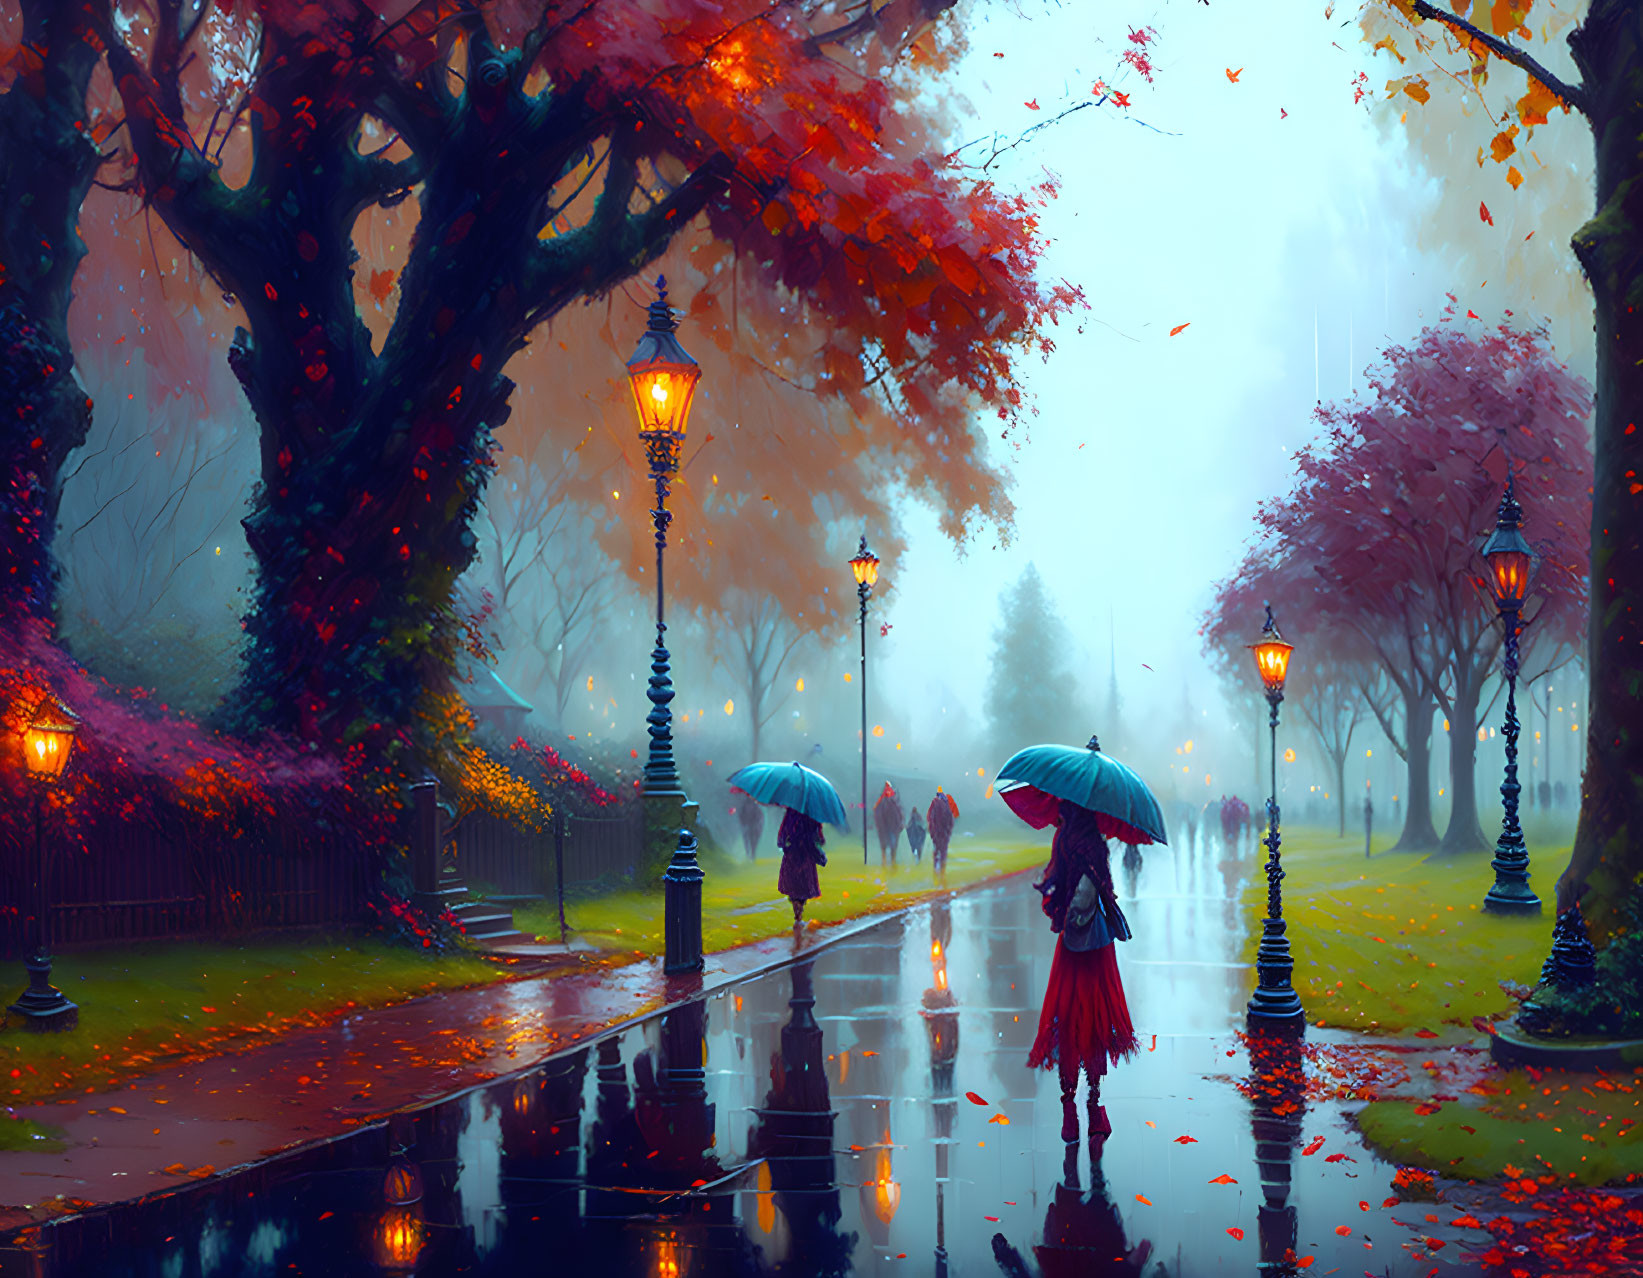 Colorful Autumn Scene: Two People with Umbrellas Walking Among Falling Leaves and Street Lamps